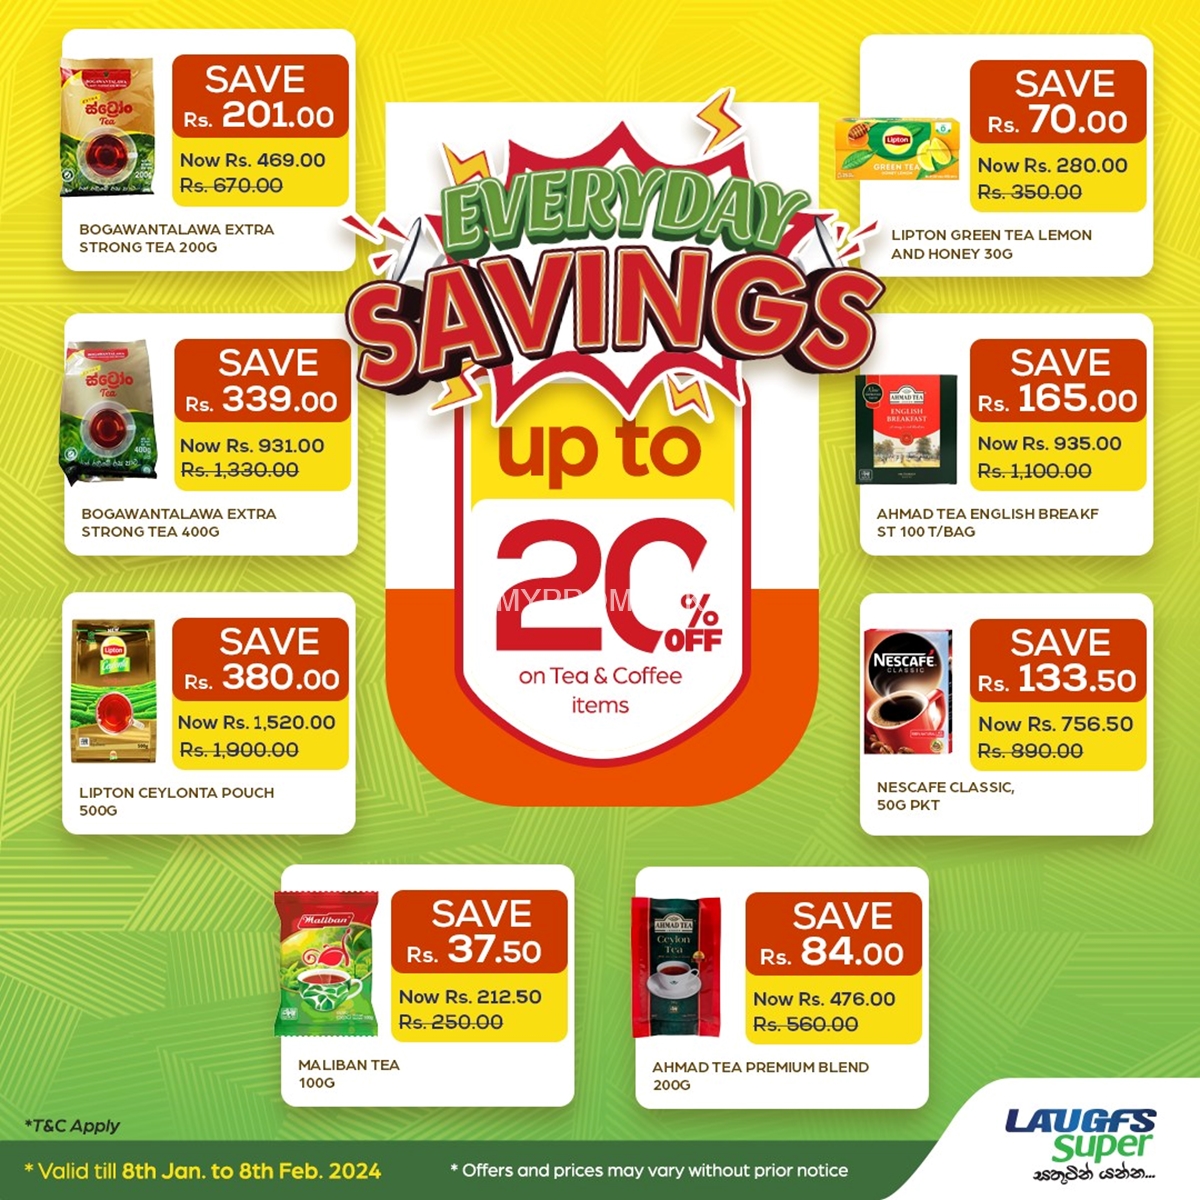 Up to 20% off on Tea & Coffee Items at LAUGFS Supermarket